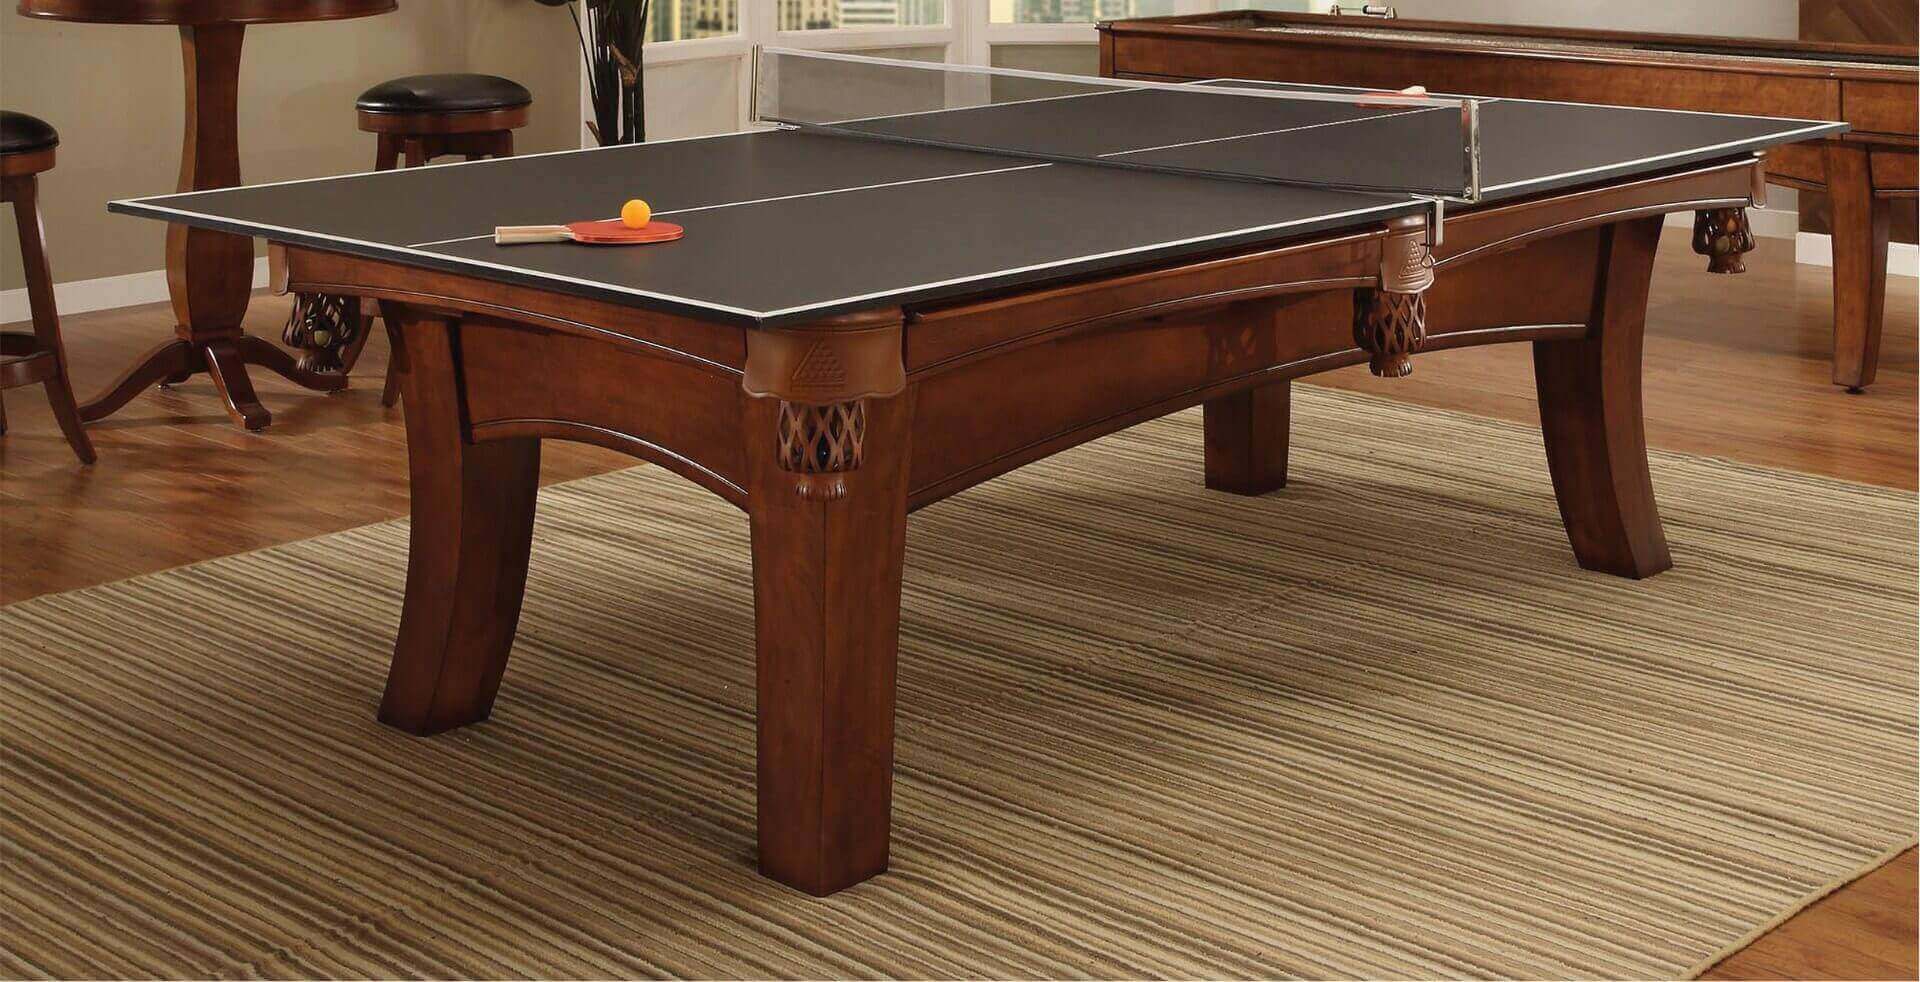 Ping Pong Table Conversion Top, Game Tables